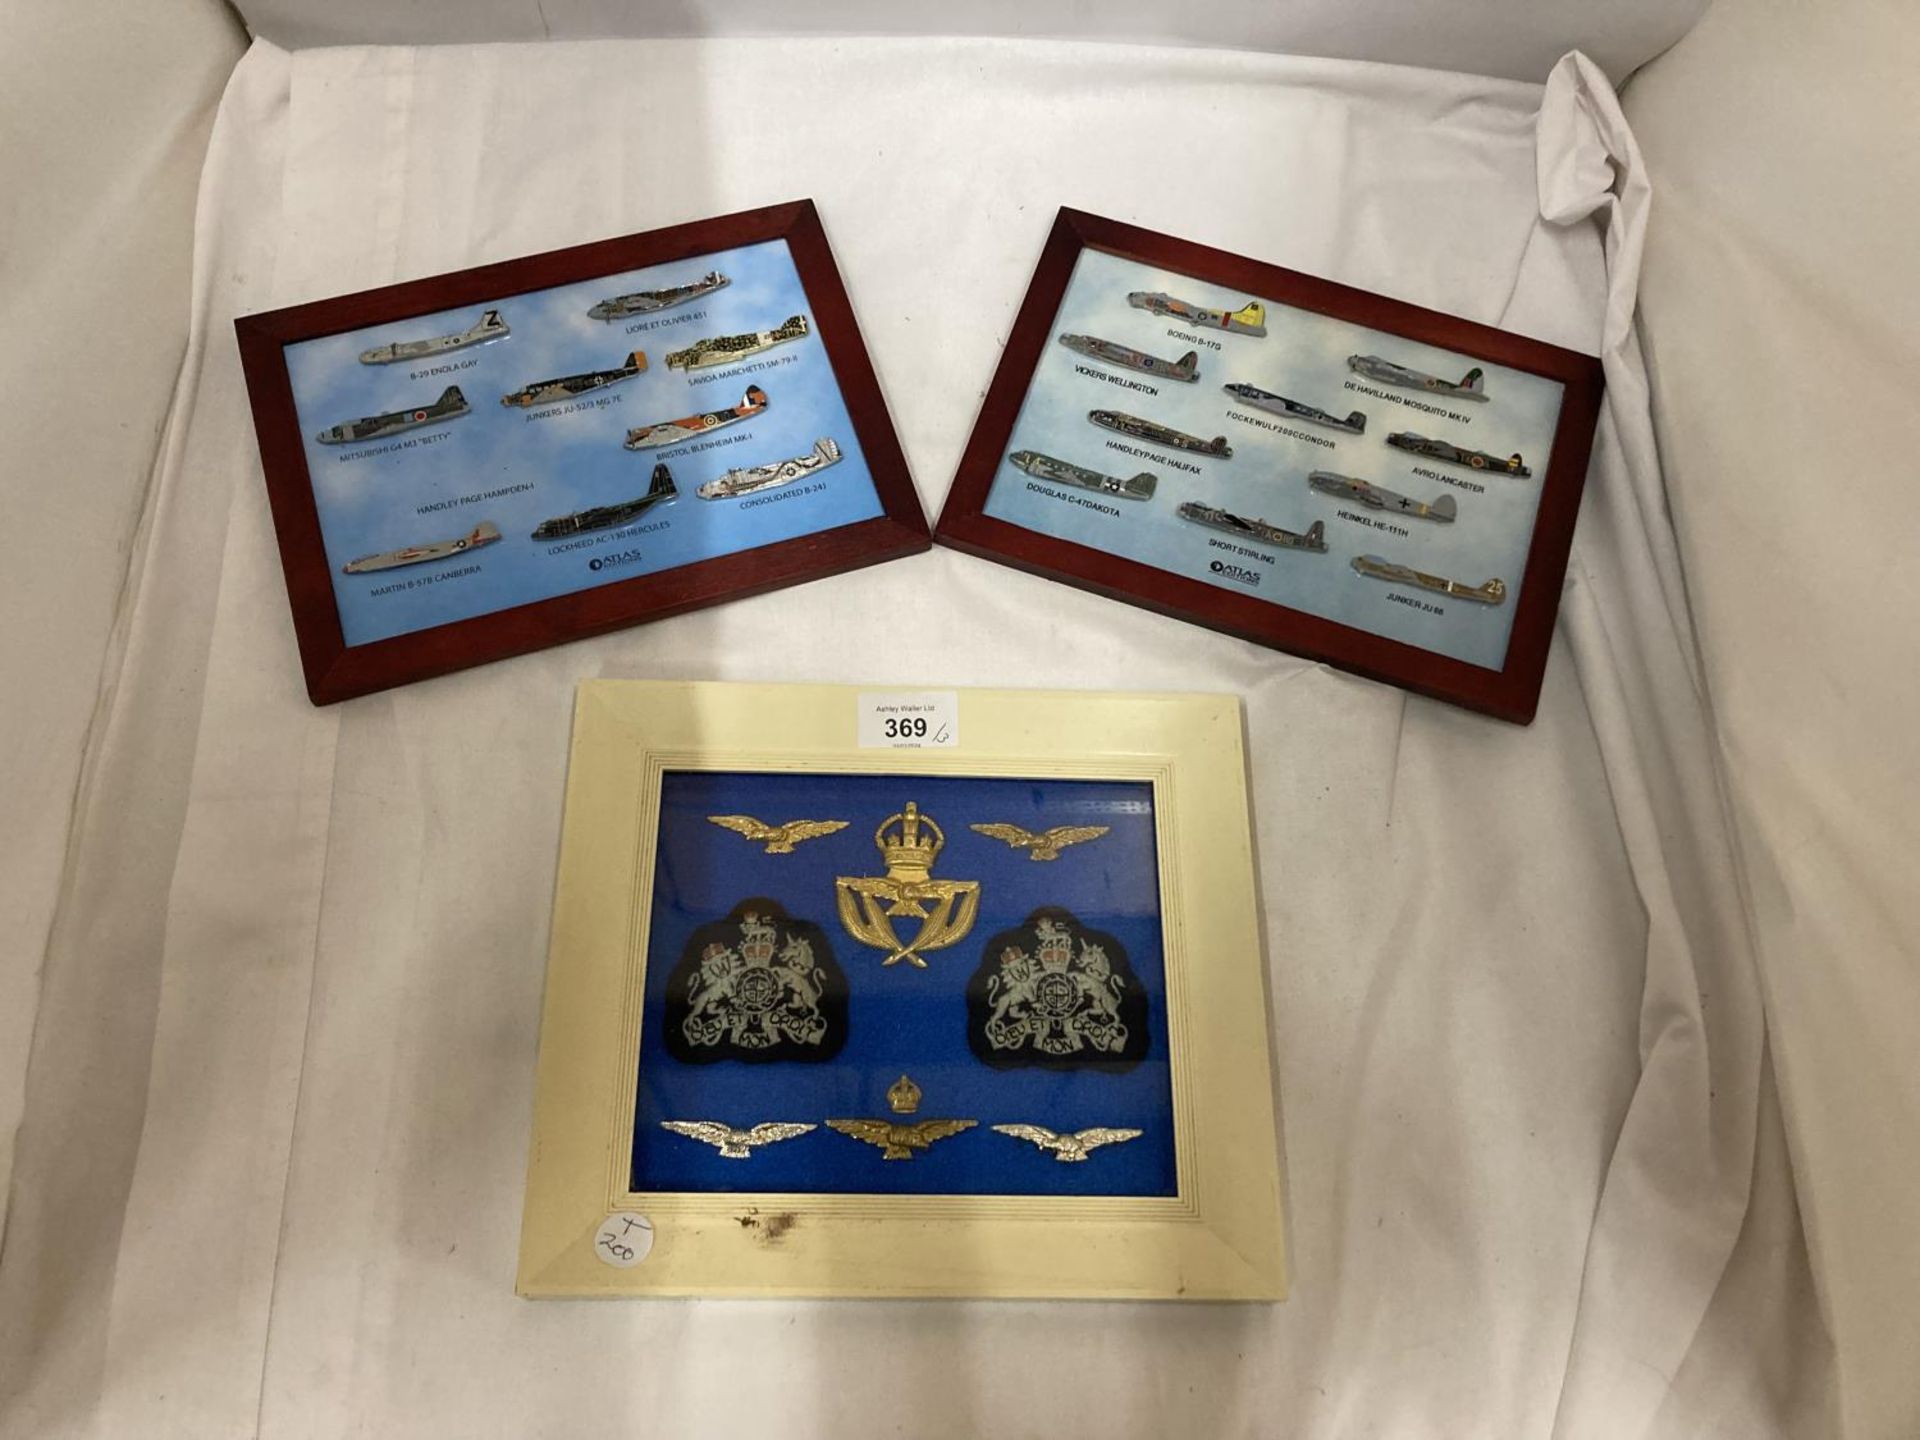 A FRAMED COLLECTION OF RAF BADGES AND TWO FRAMED PLANE COLLECTIONS